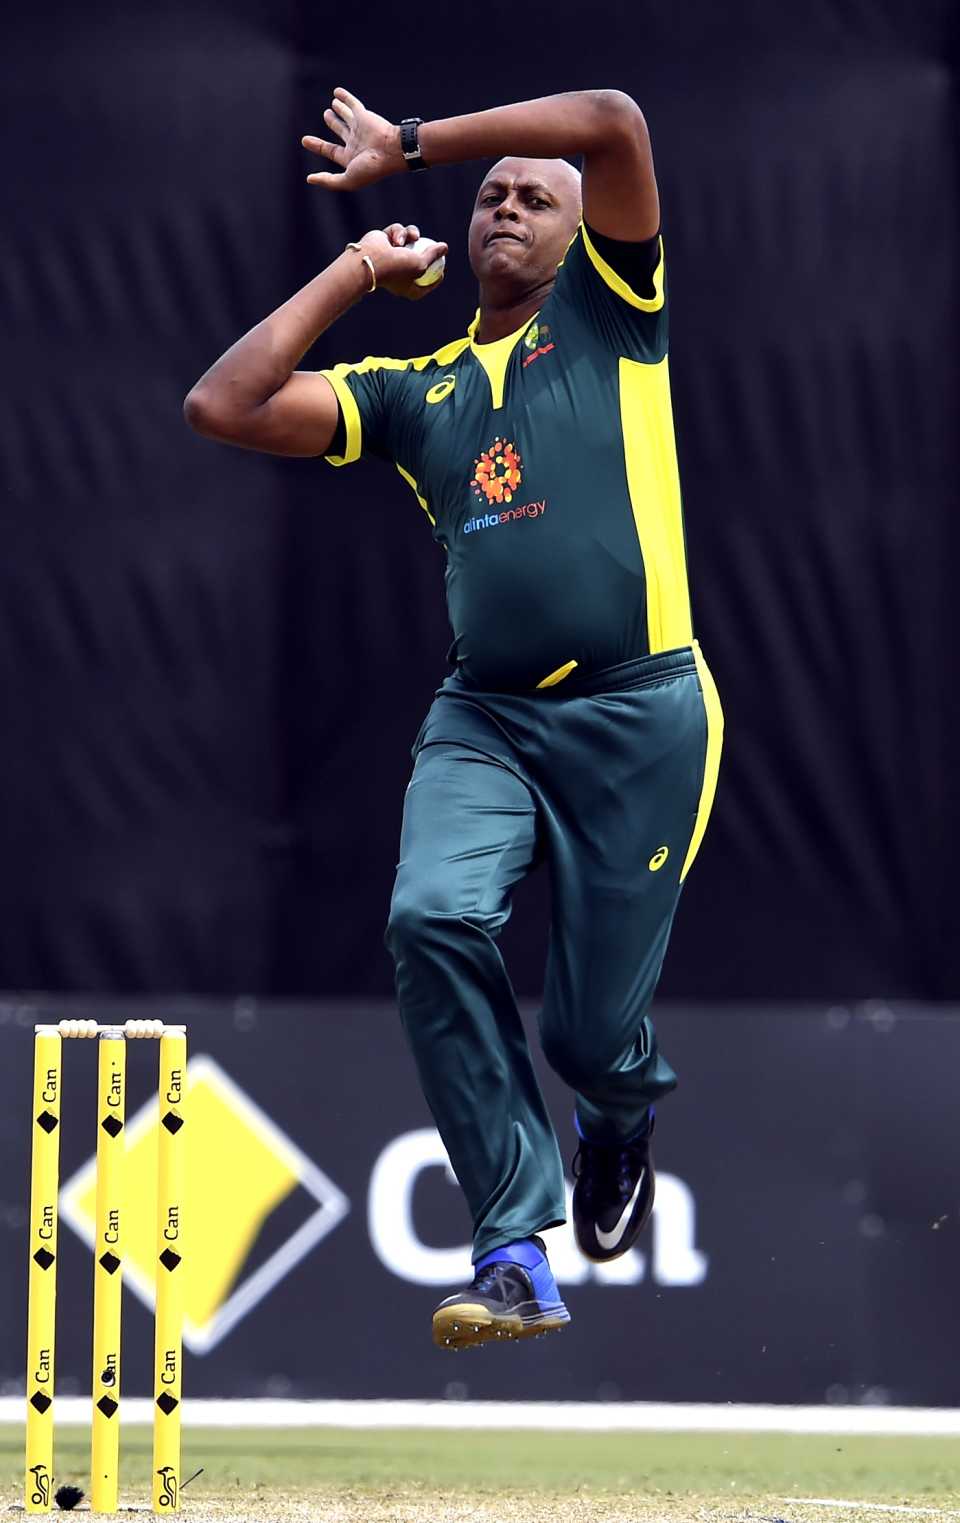 Courtney Walsh bowls during the Bushfire Bash game, Gilchrist XI v Ponting XI, Melbourne, February 9, 2020